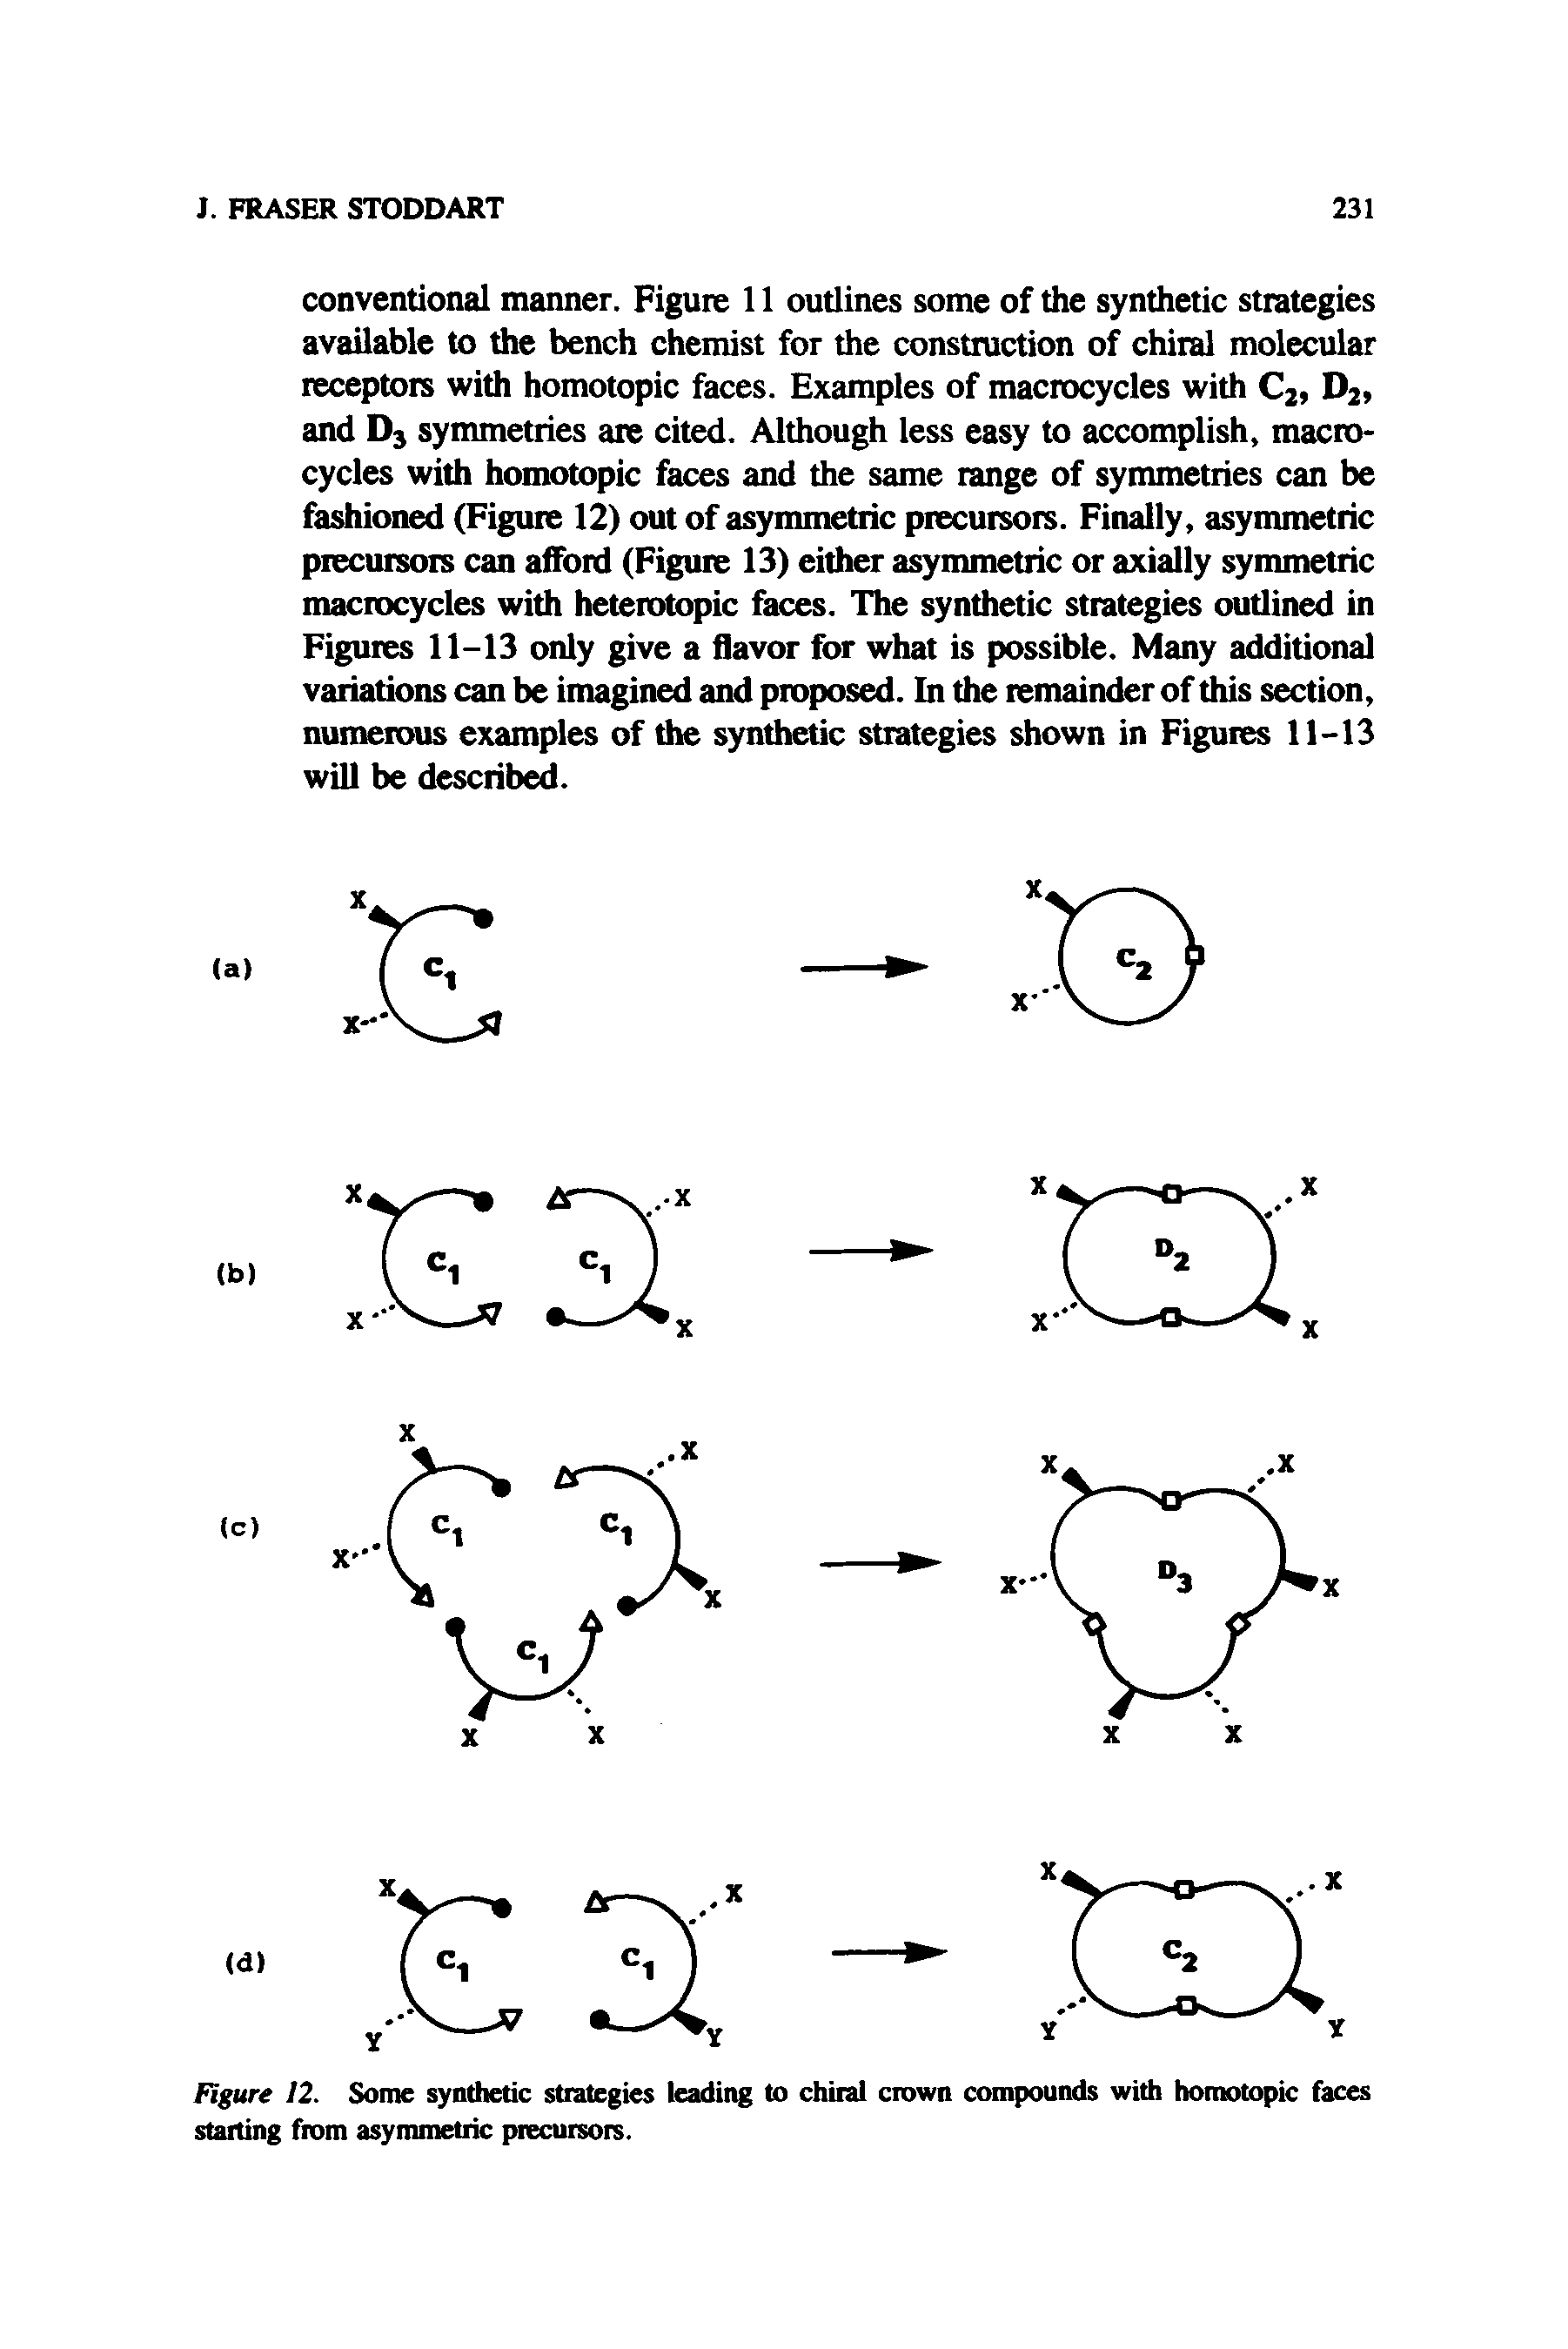 Figure 12. Some synthetic strategies leading to chiral crown compounds with homotopic faces starting from asymmetric precursors.